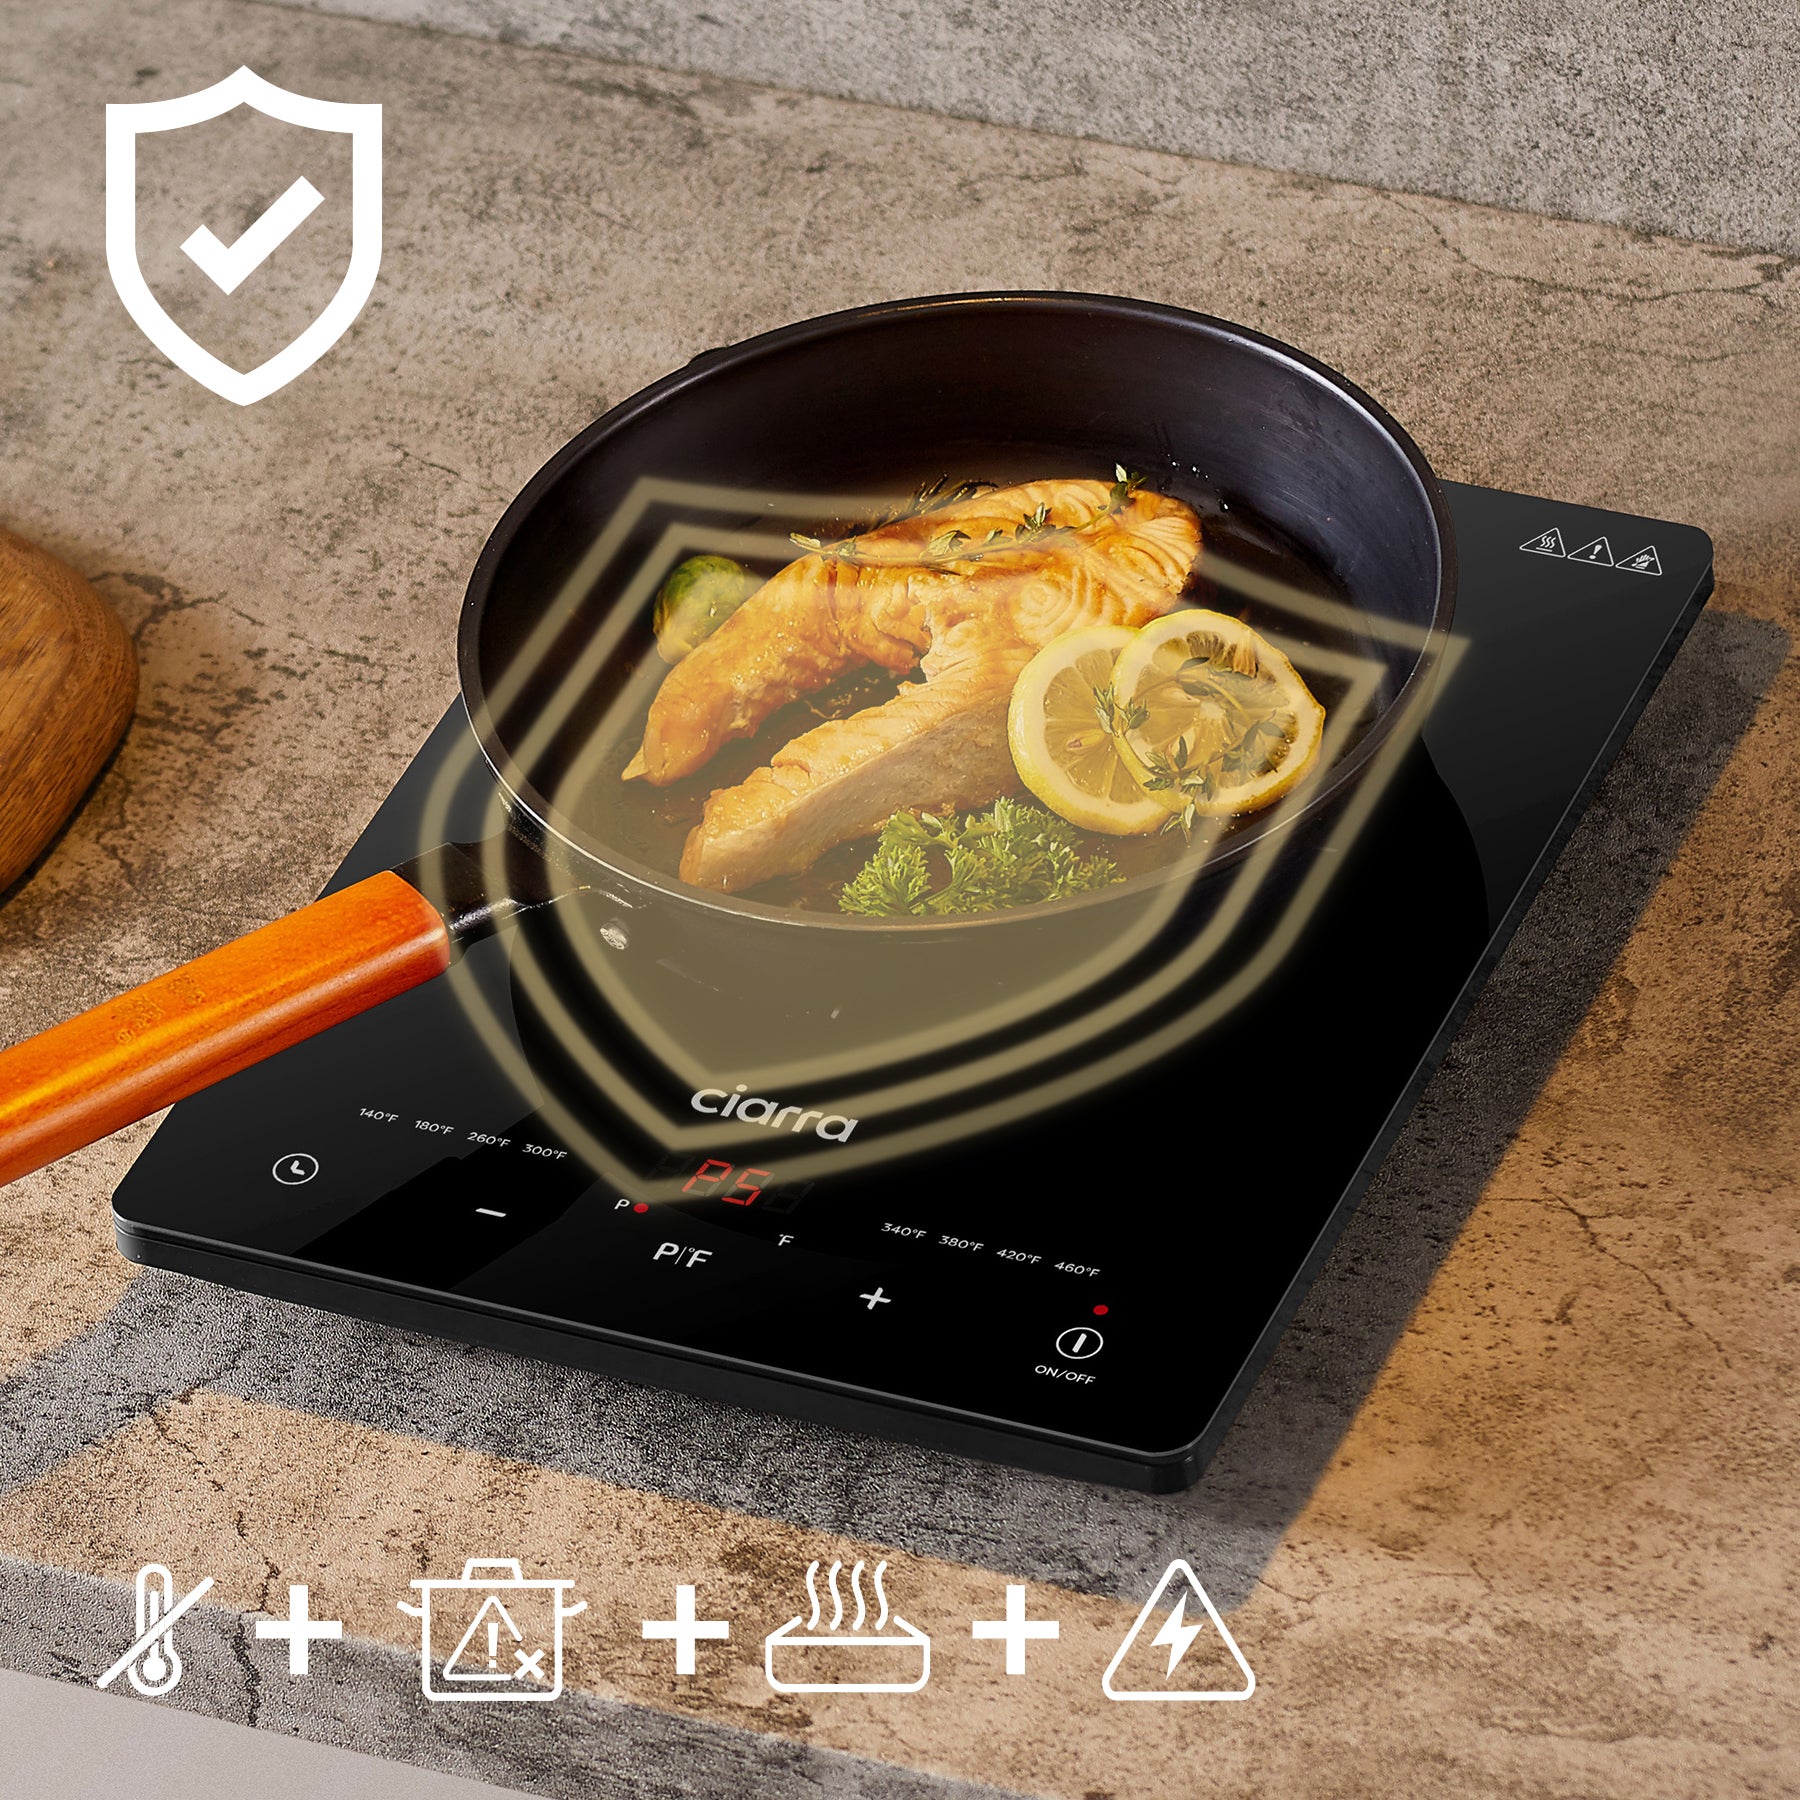 The Best Portable Induction Cooktop - Carbon Switch